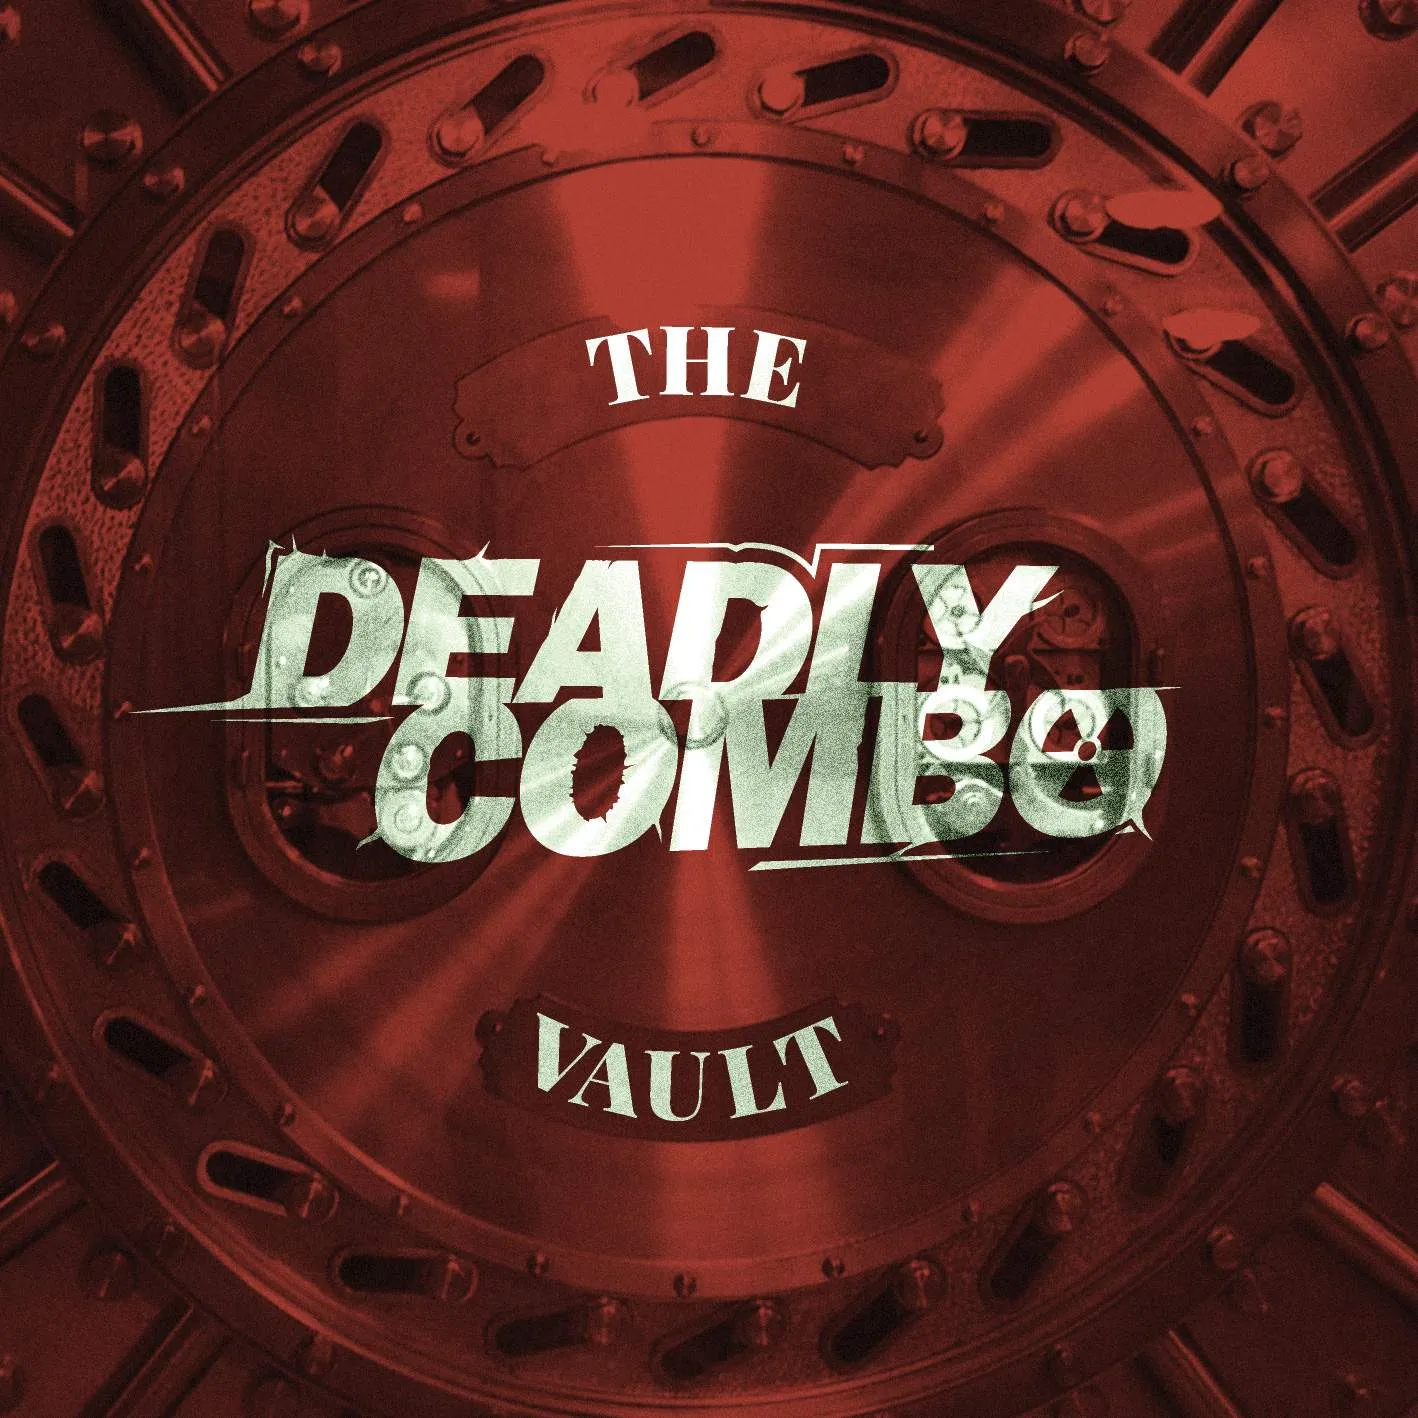 Album cover for “The Vault” by Deadly Combo